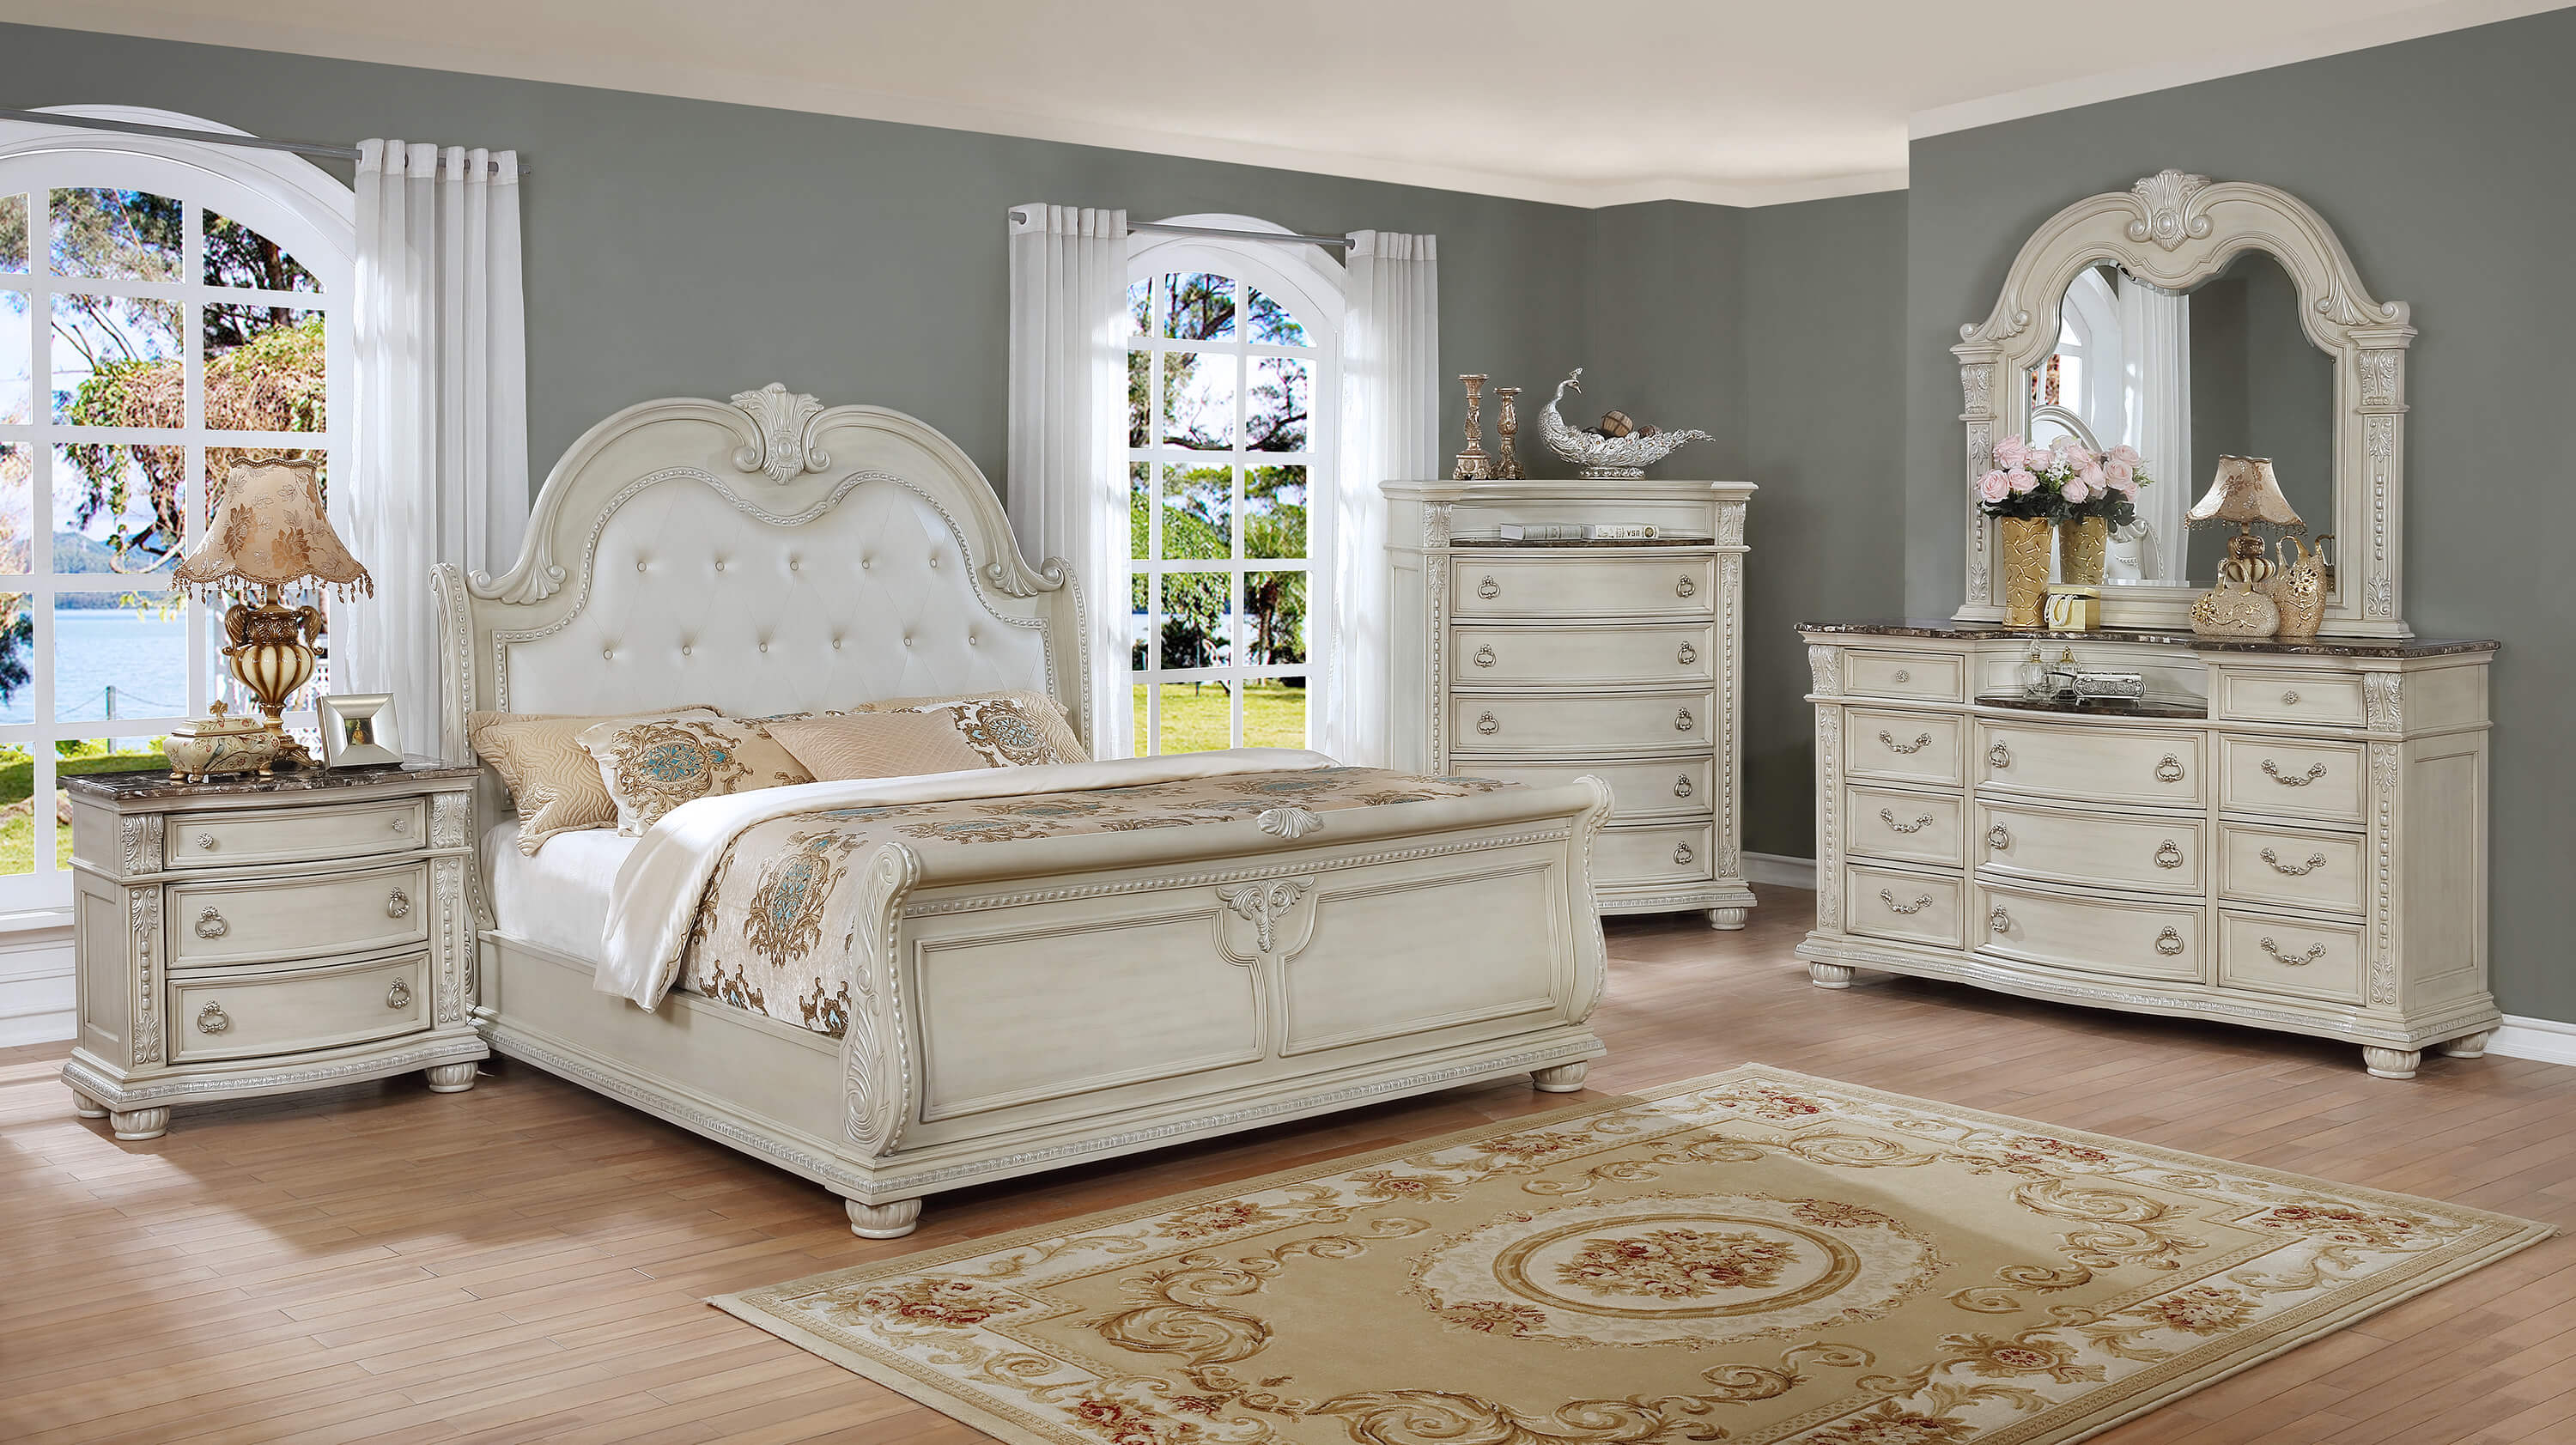 B1630 Stanley Antique White Marble Bedroom Set Crown Mark intended for sizing 3000 X 1683